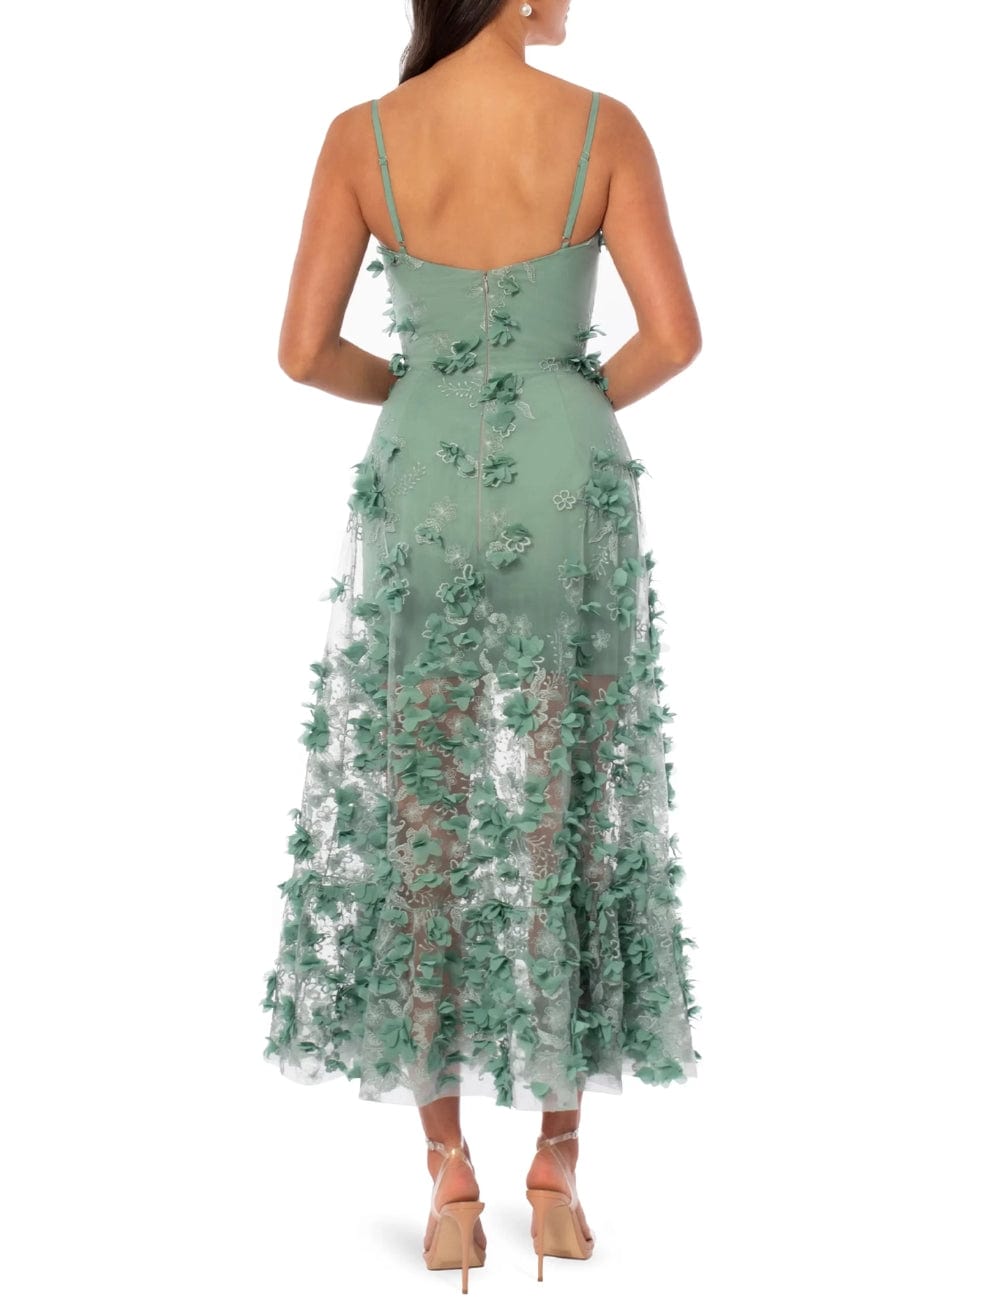 Vanessa Floral Gown